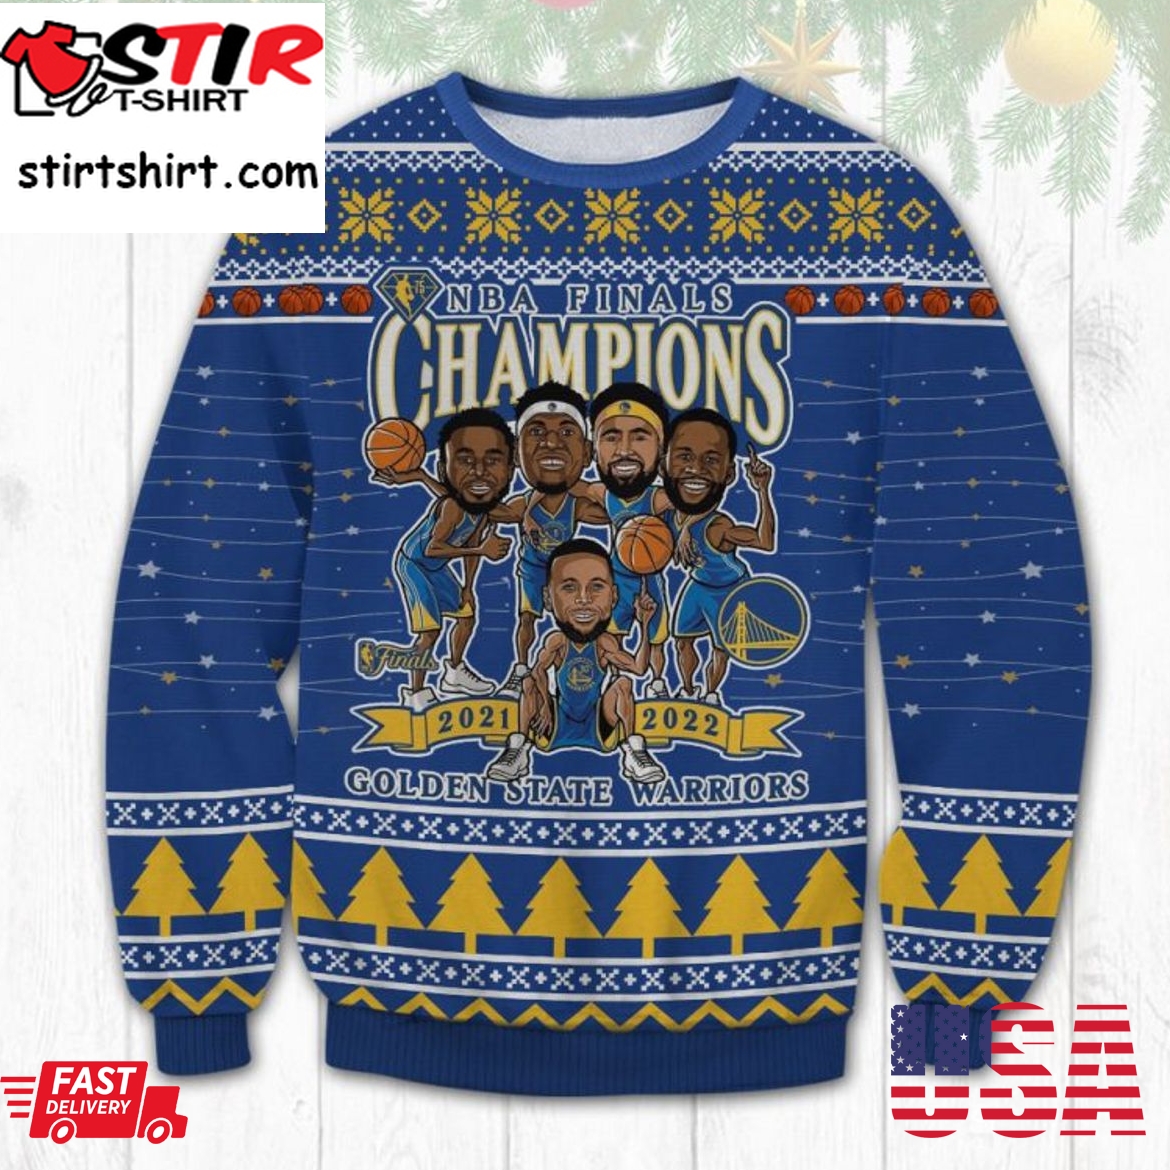 Hot Nba Finals Champions 2021 2022 Golden State Warriors Ugly Christmas Sweater